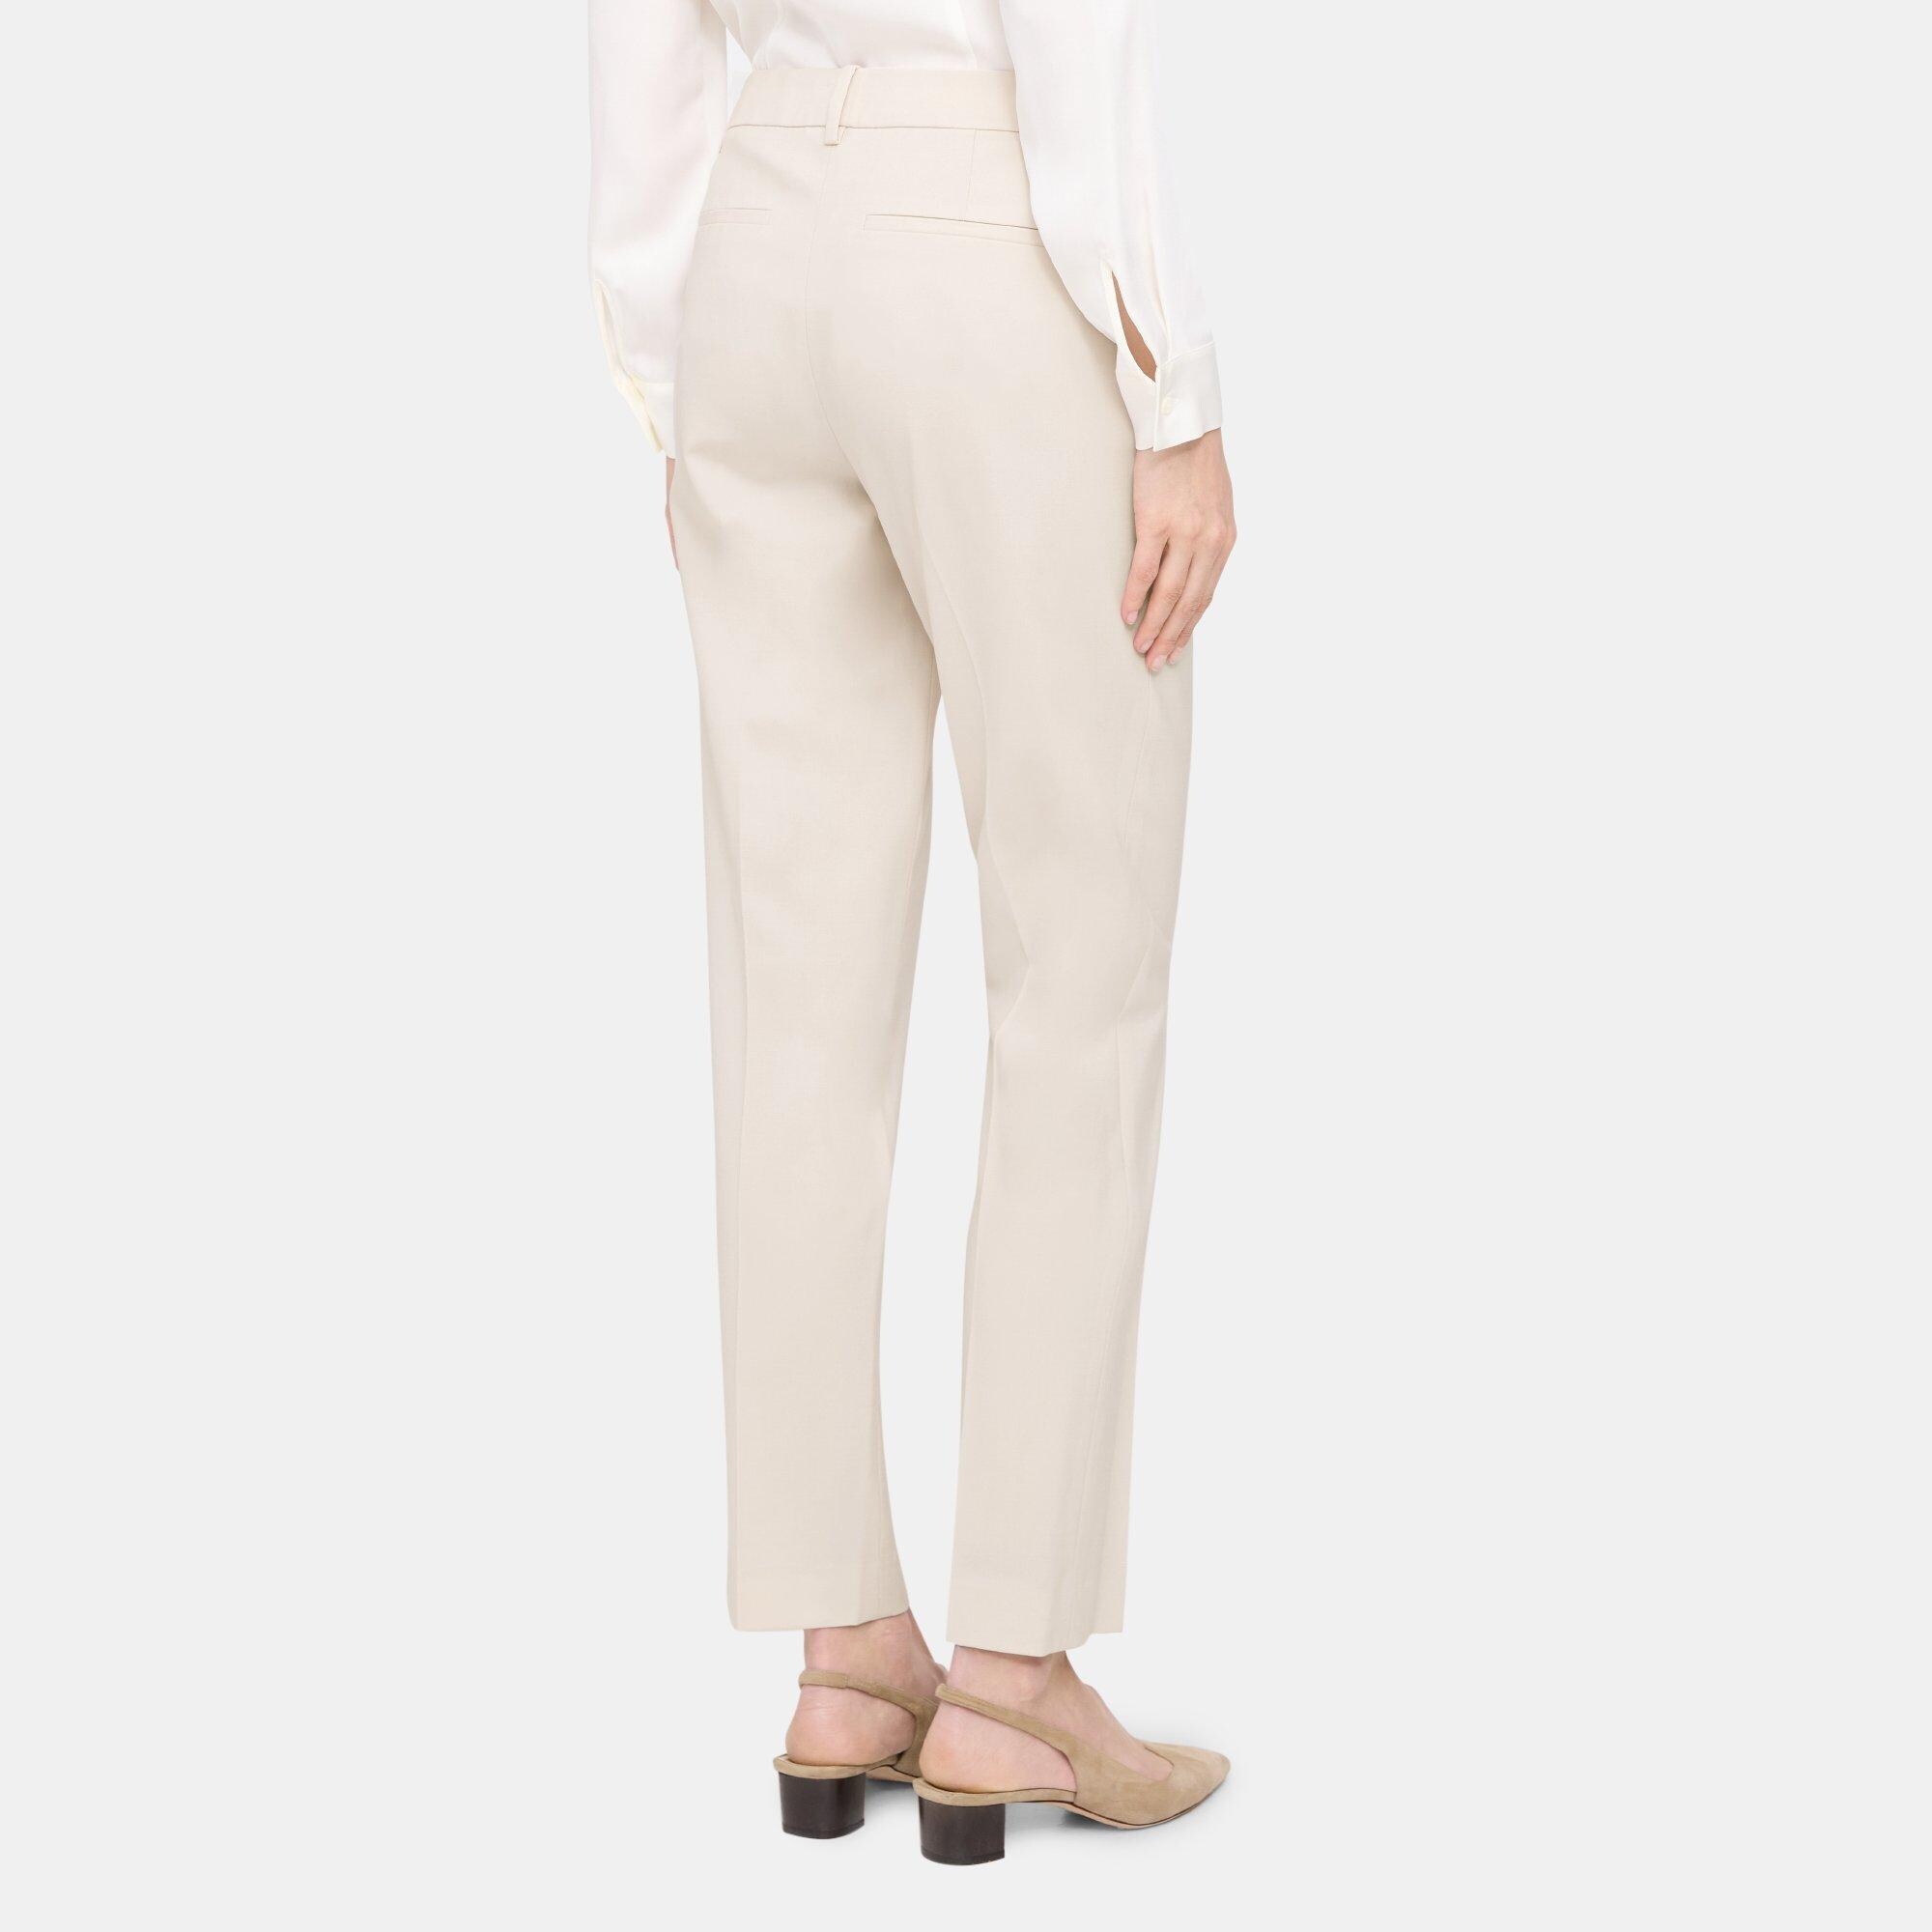 Straight-Fit Washable Wool Hidden Extension Dress Pants – Online Warehouse  Sale